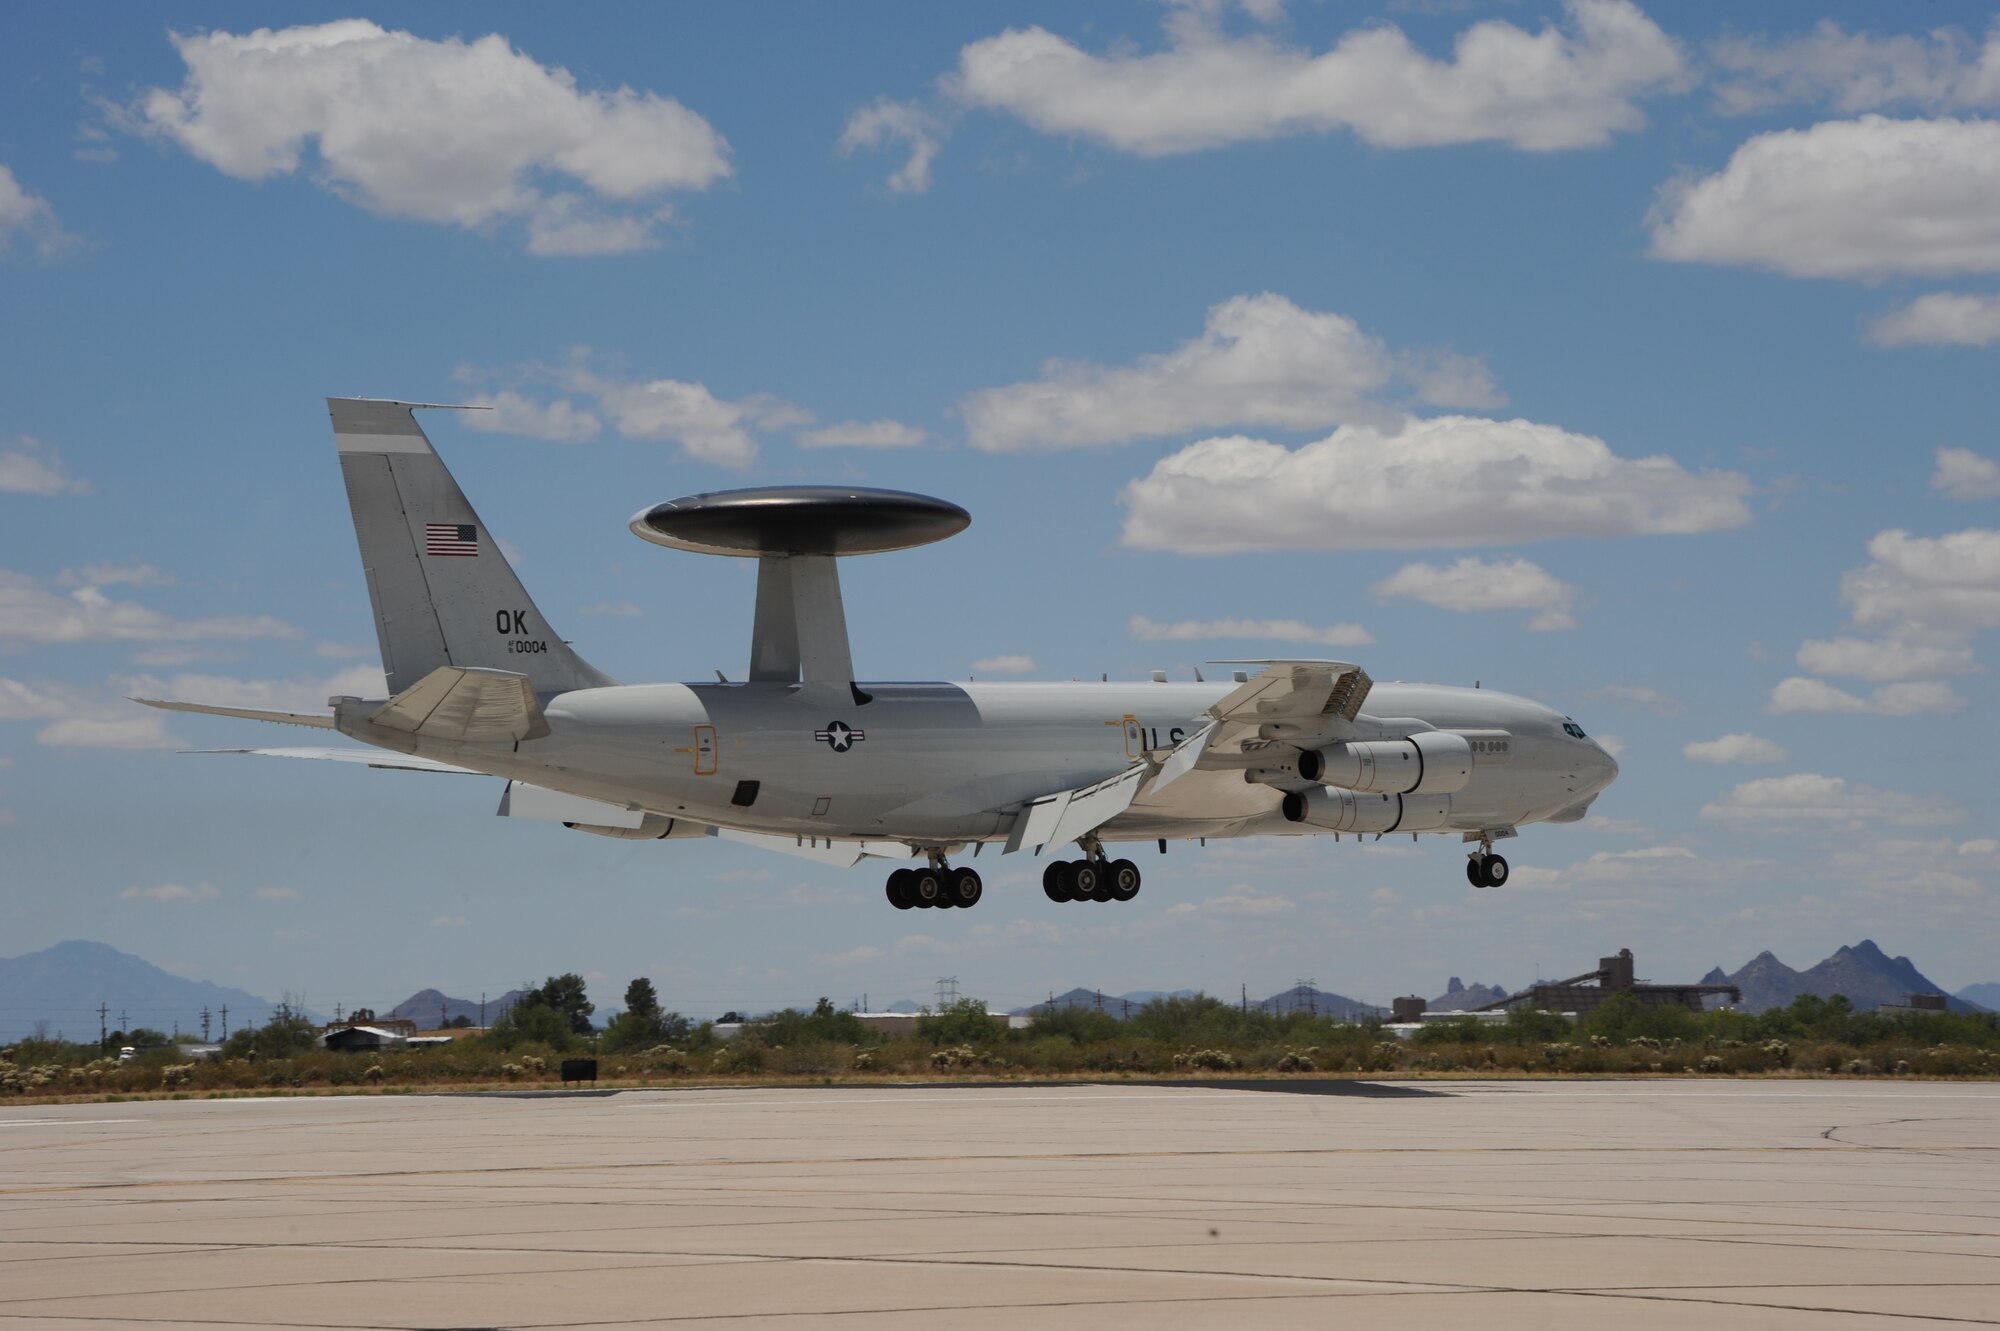 An E-3 Airborne Warning and Control System aircraft from Tinker Air Force Base, Okla., prepares to land at Davis-Monthan AFB, Ariz., May 16, 2015. Eight AWACS arrived here due to tornado alerts in Oklahoma.  AWACS provide all-weather surveillance, command, control and communications needed by commanders of U.S. and NATO air defense forces. (U.S. Air Force photo by Senior Airman Betty R. Chevalier)